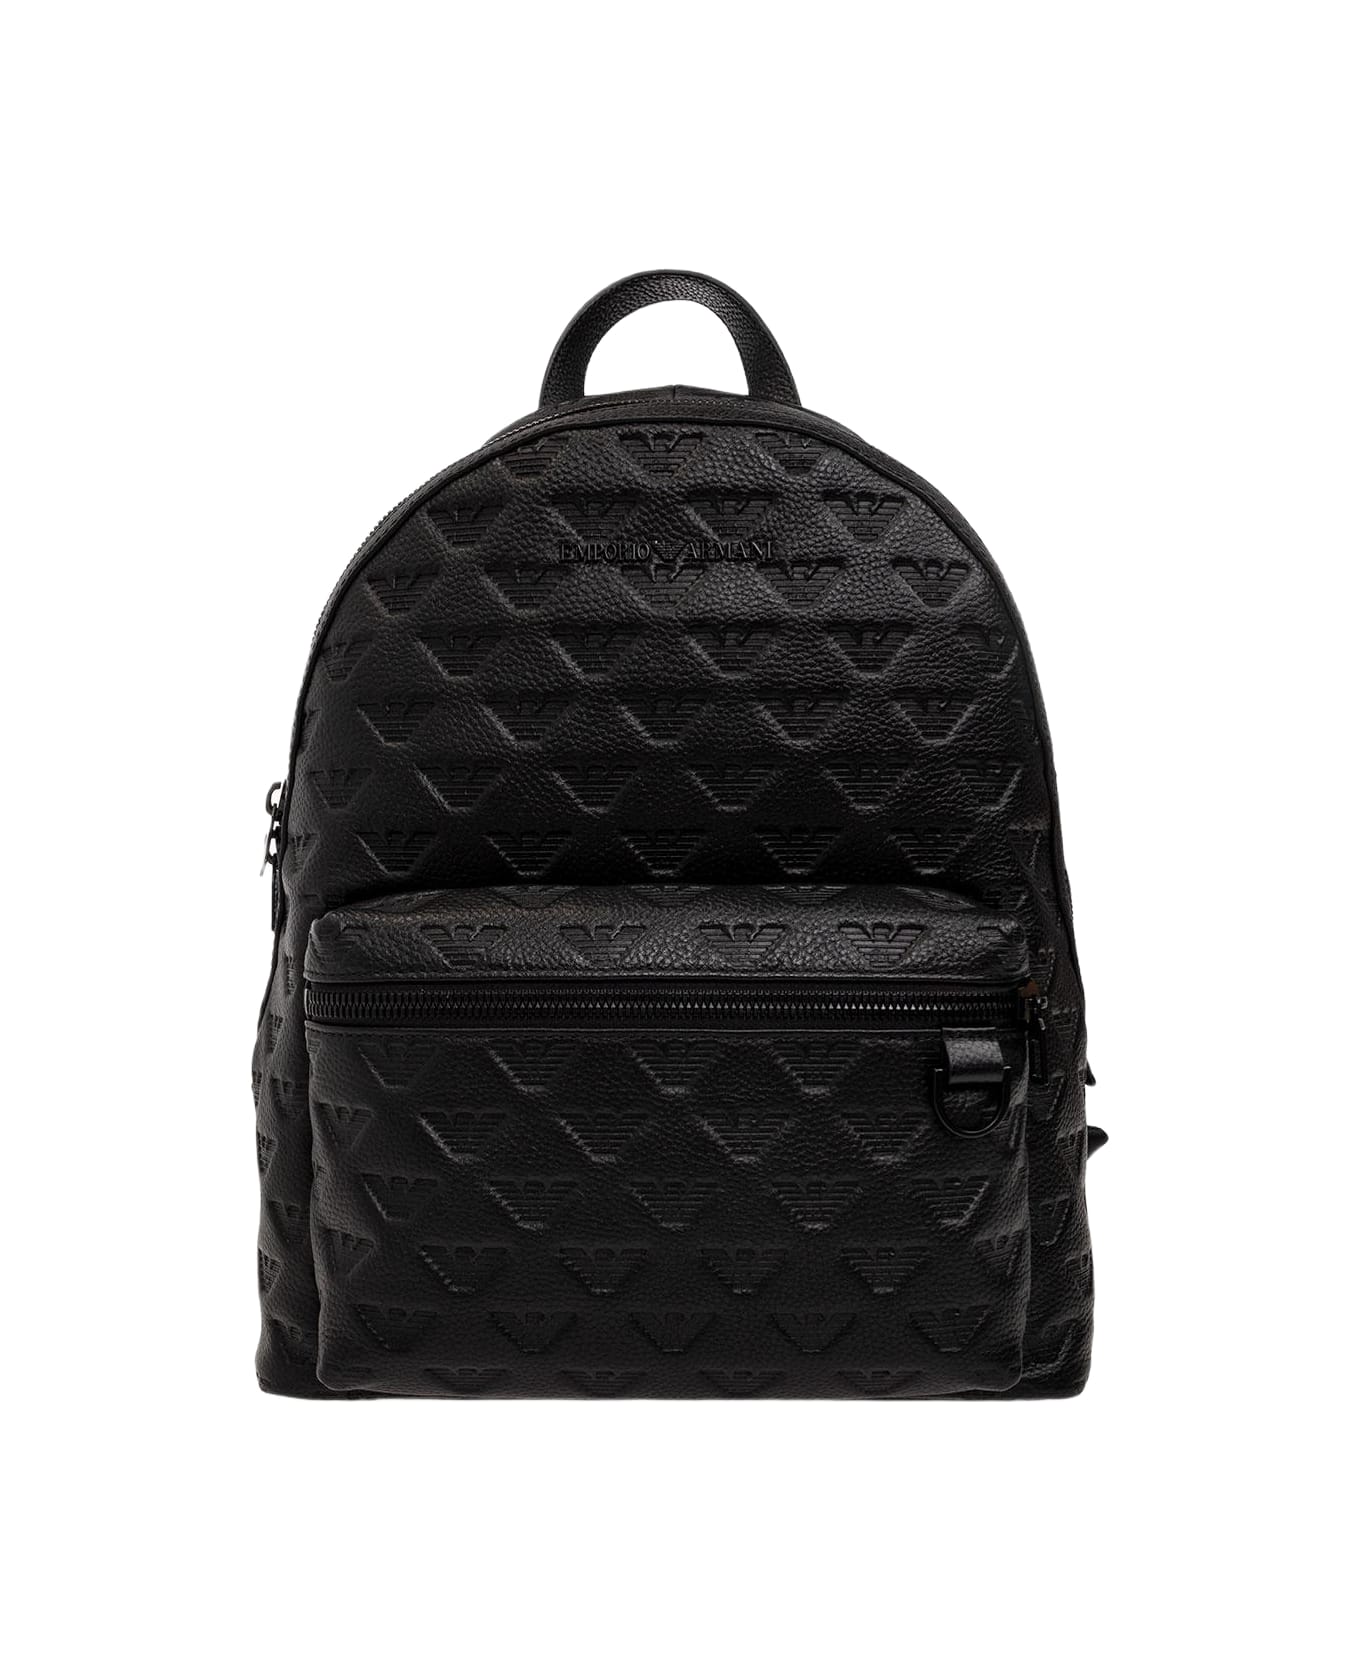 Emporio Armani Embossed Leather Backpack - Black バックパック